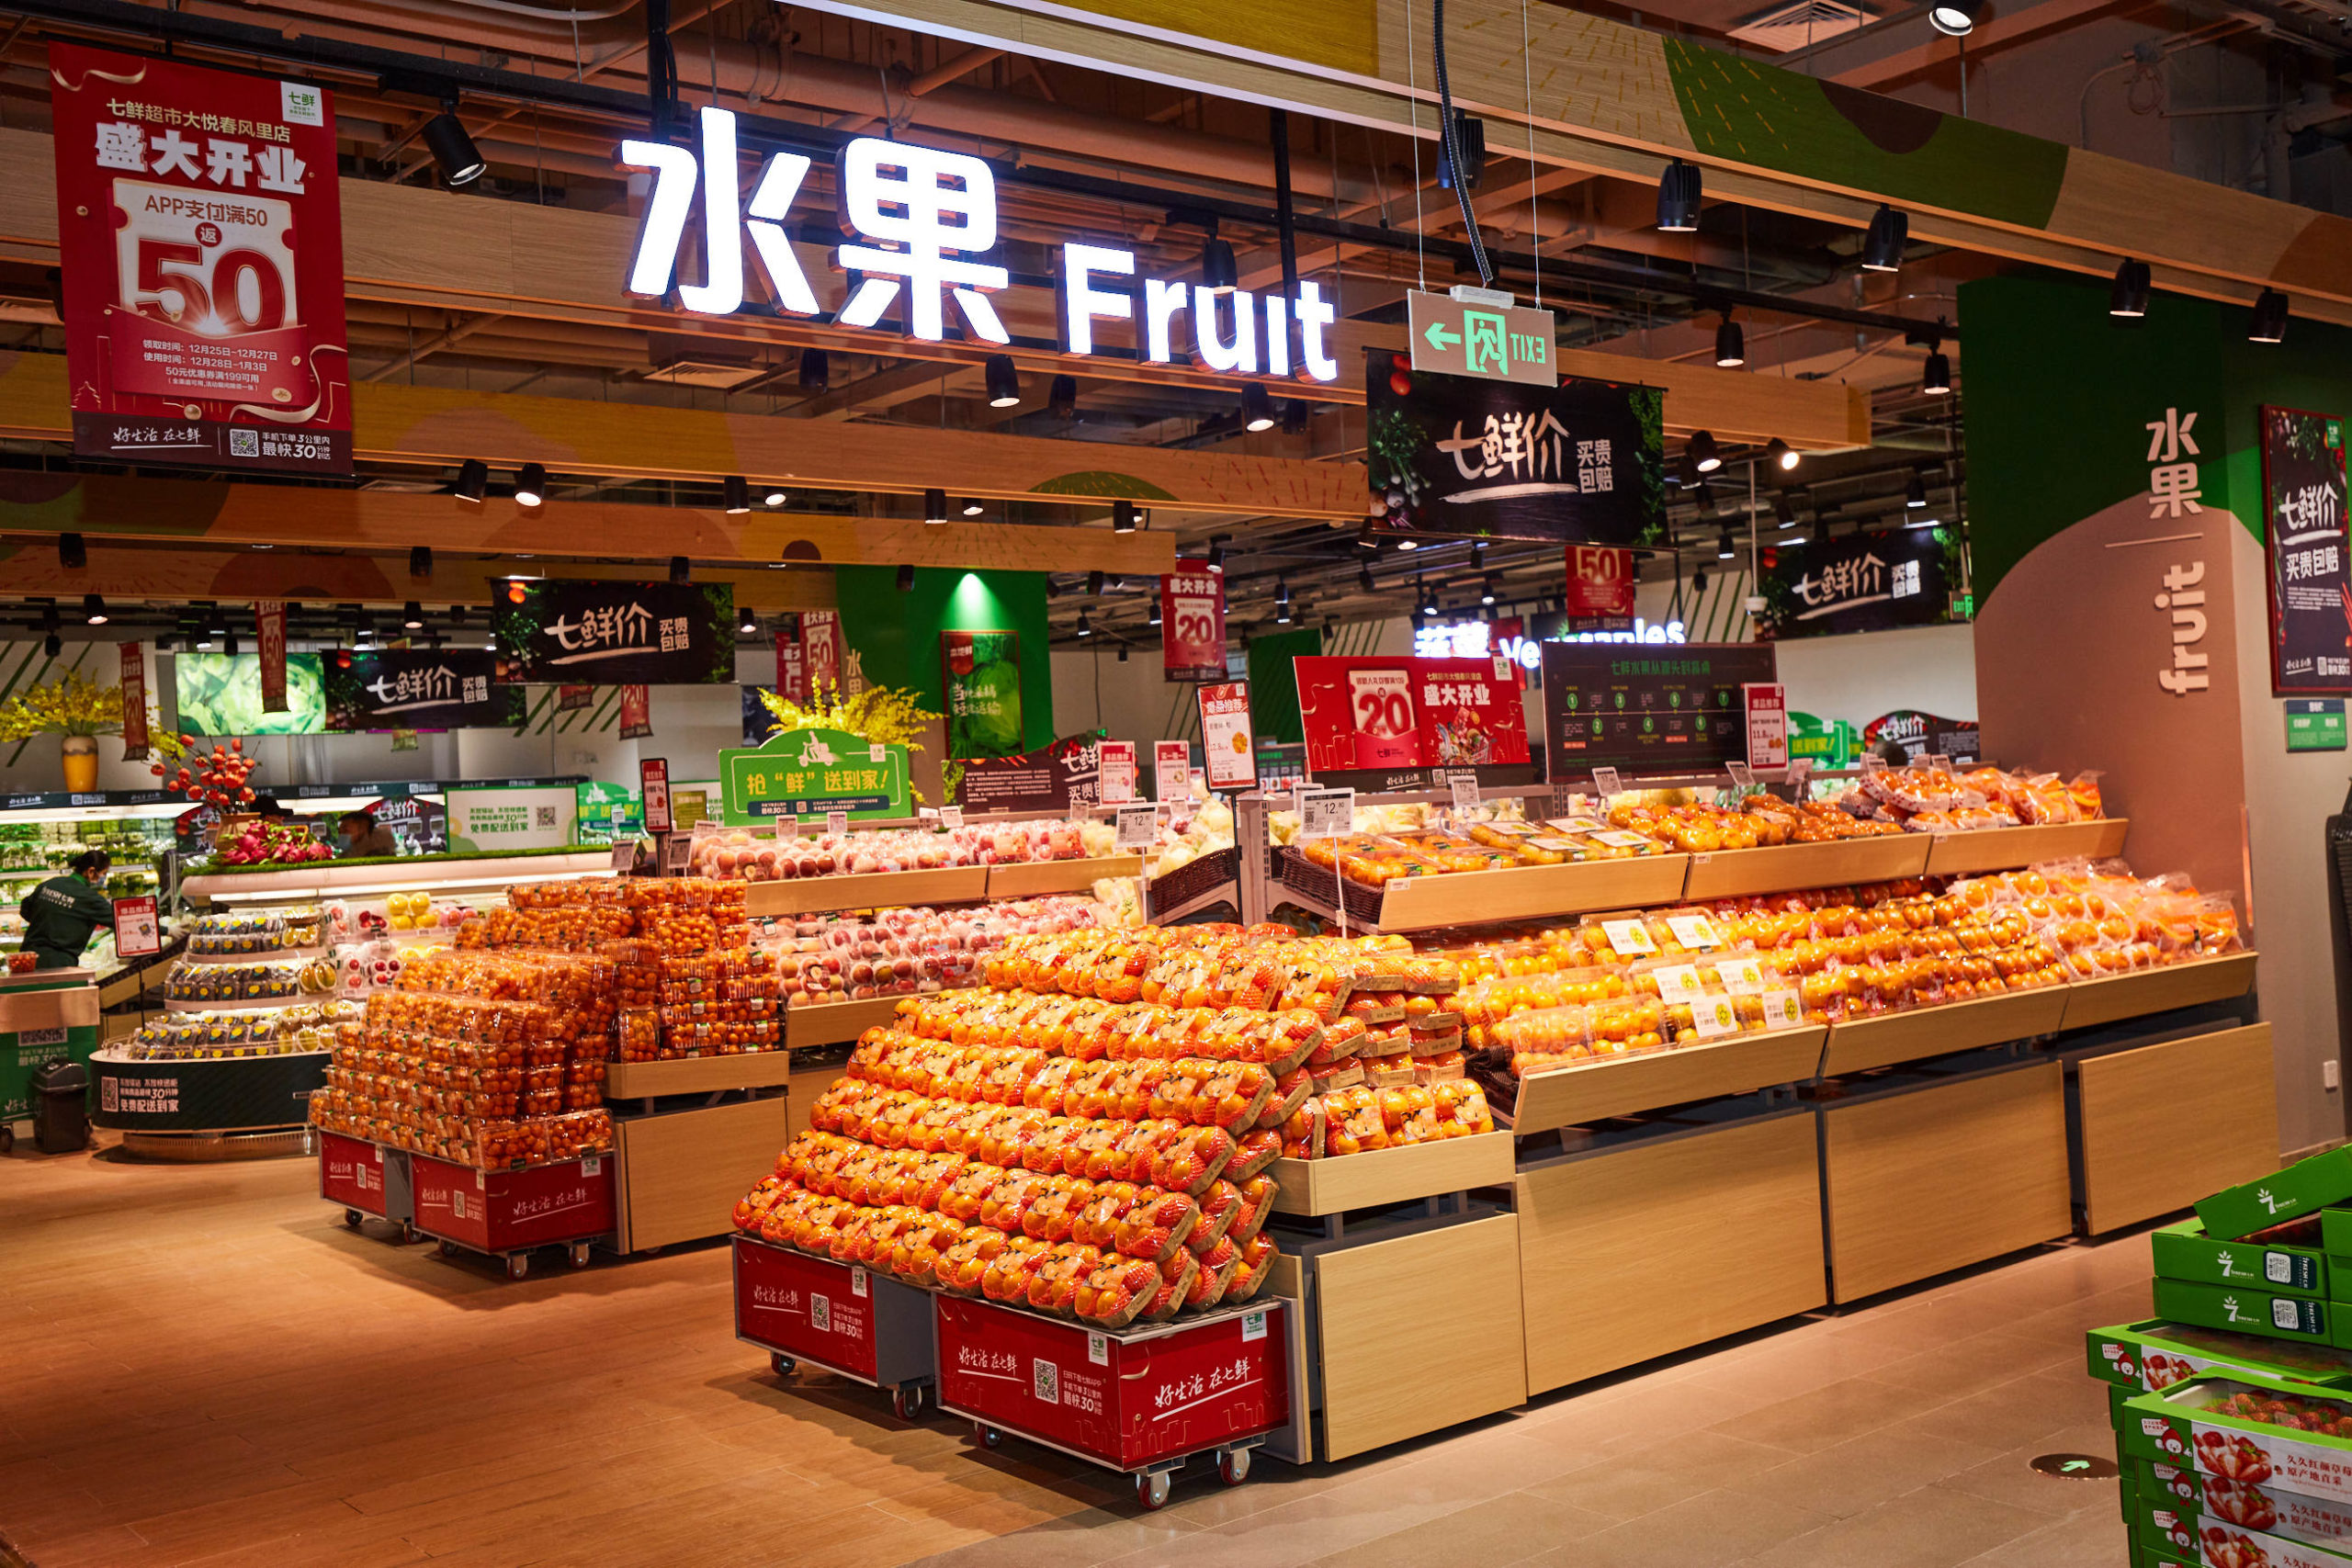 SEVEN FRESH, as one of JD’s key omnichannel retail initiatives, was launched in 2018 and has positioned itself as a high-end offline retail supermarket